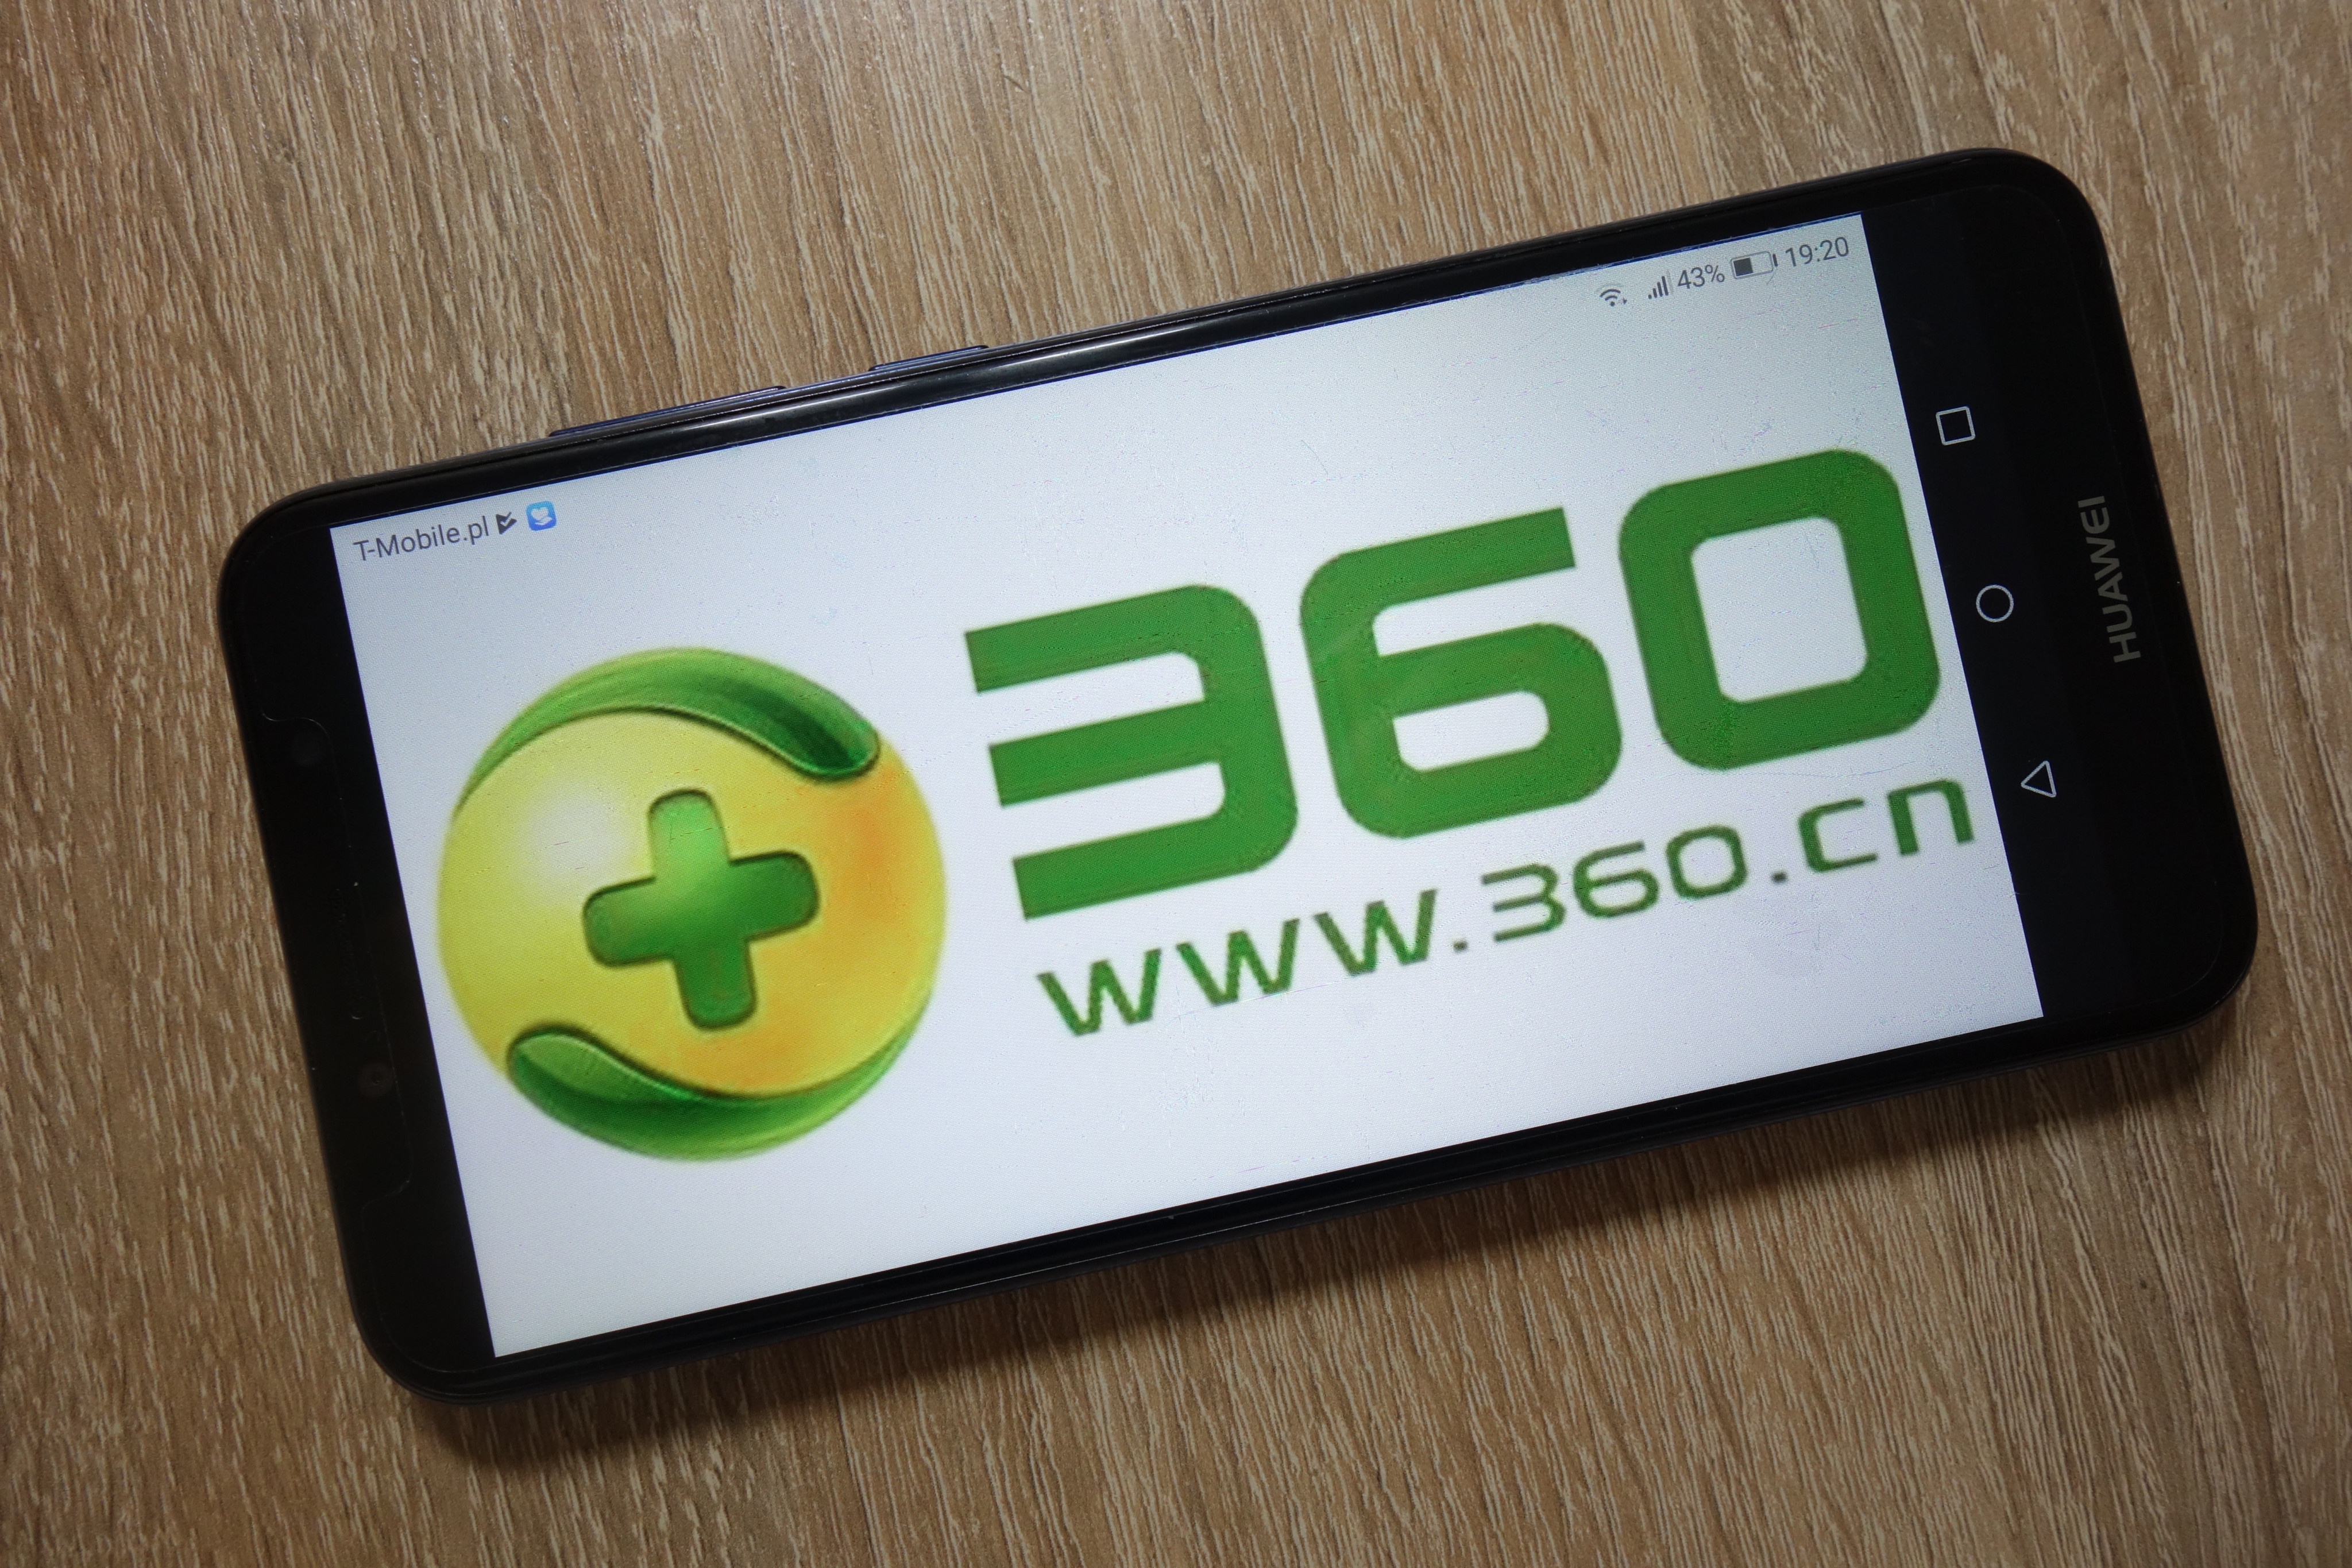 Beijing-based 360 Security Technology develops and sells antivirus software for desktop and mobile users. Photo: Shutterstock